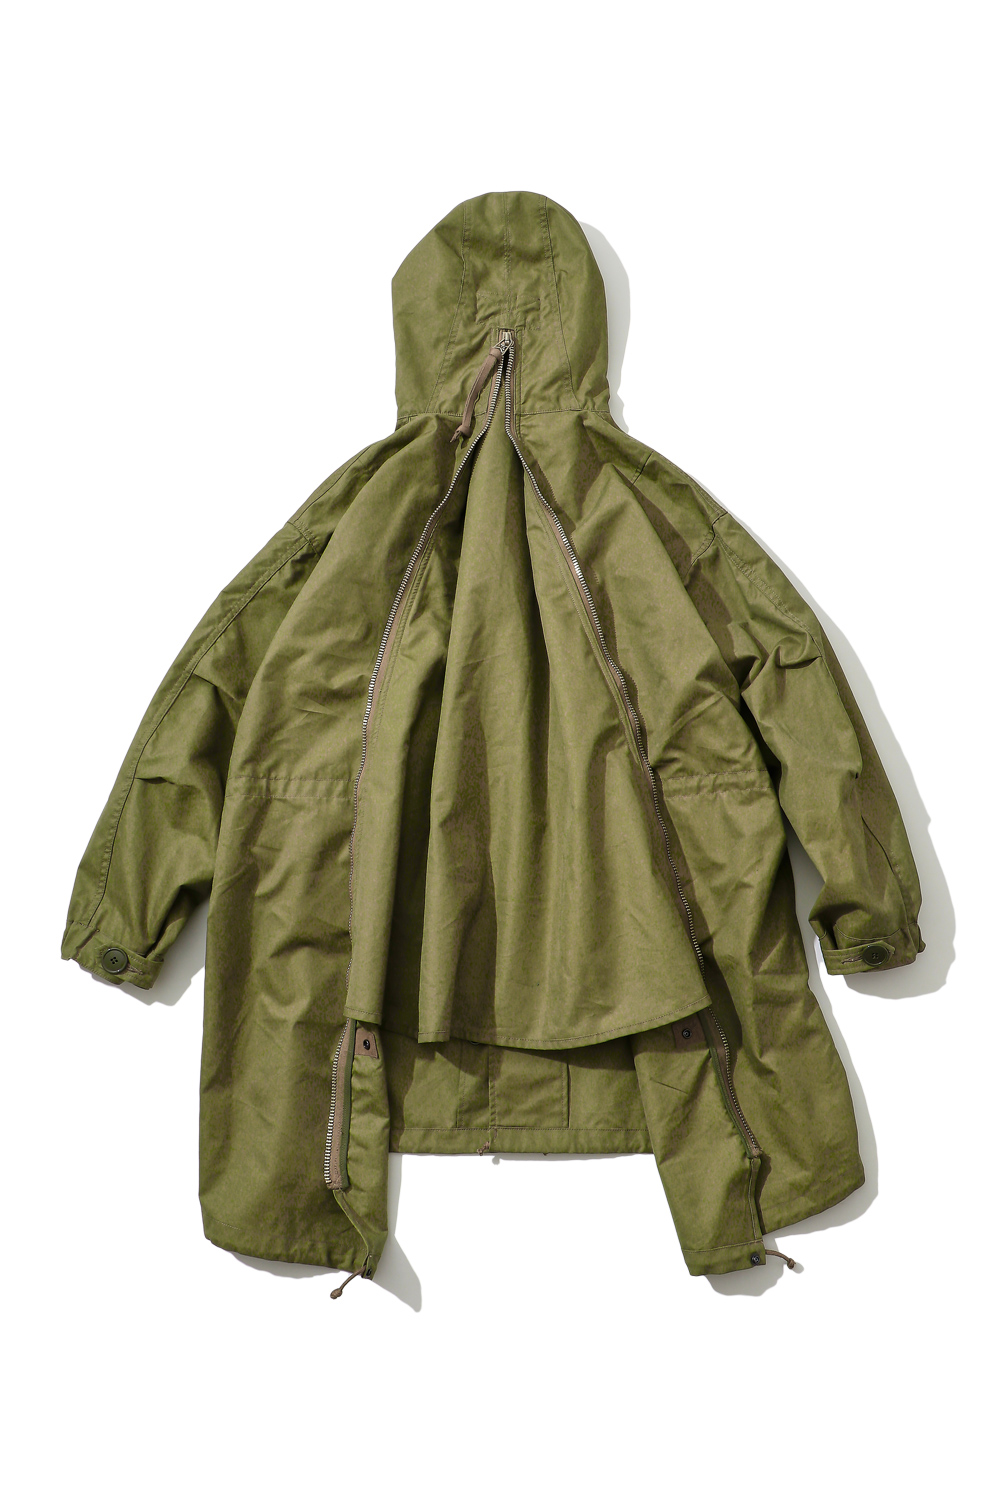 BAMBOO SHOOTS x MOUNTAIN RESEARCH  B.P.’S FISHTAIL PARKA